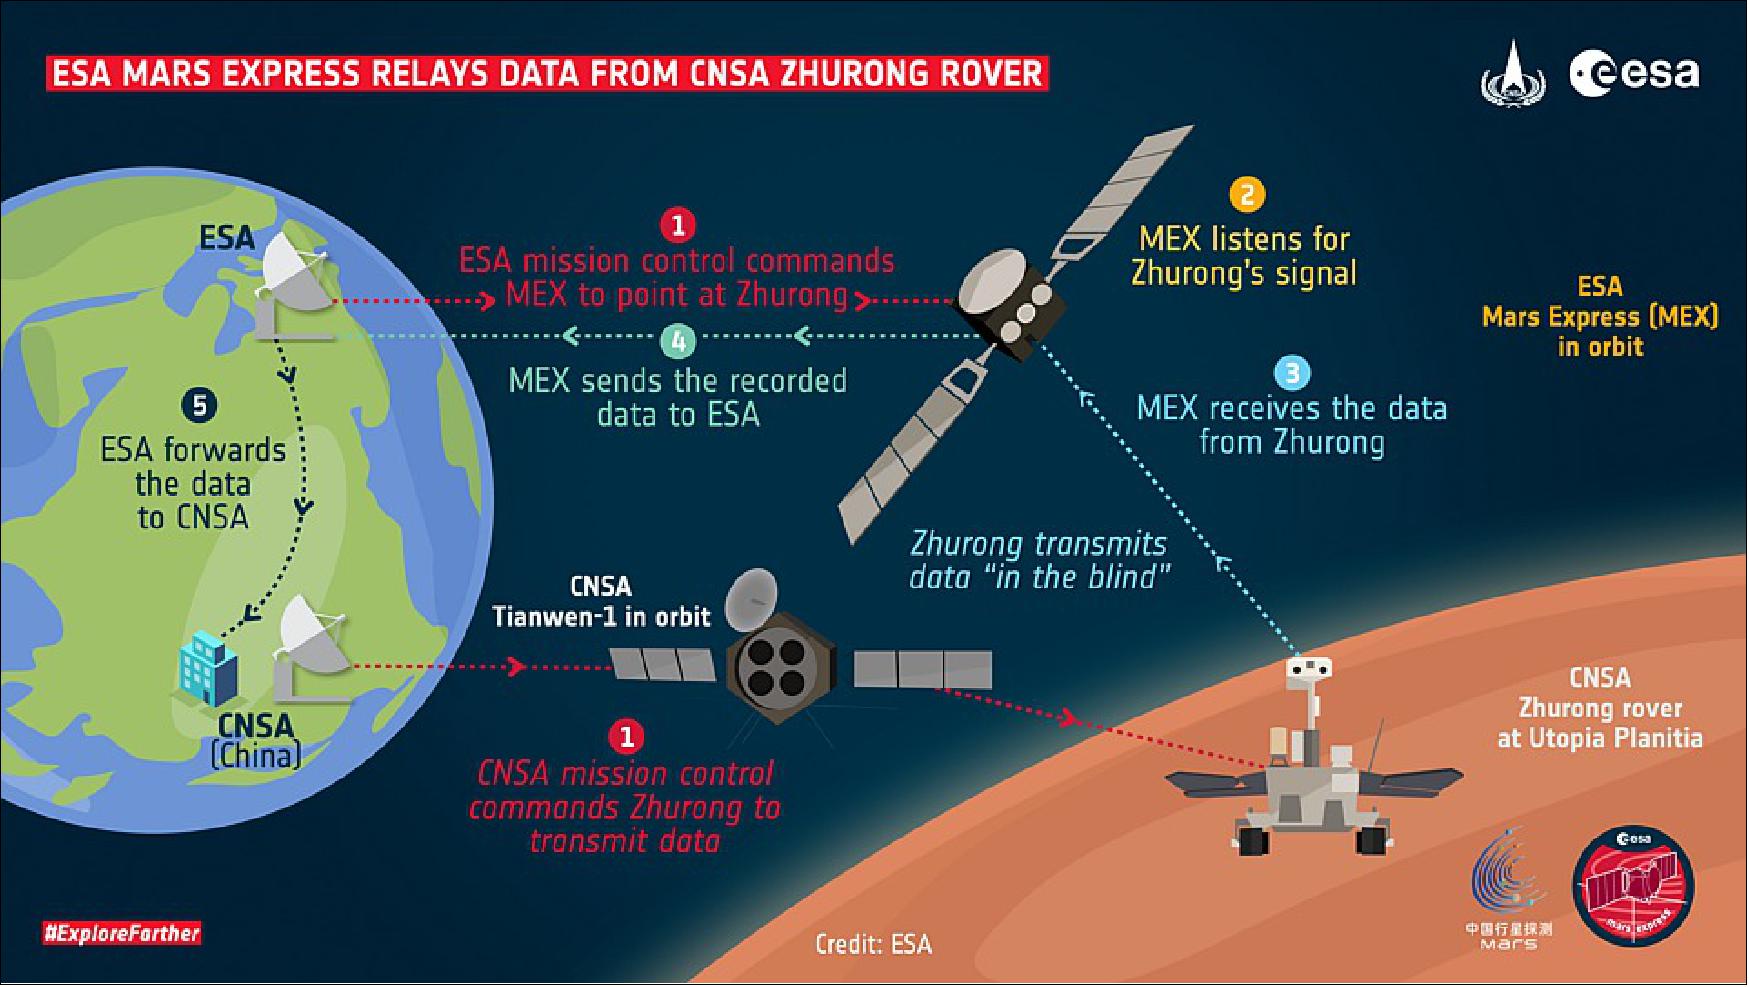 Figure 43: ESA Mars Express relays data from CNSA Zhurong rover. Landers and rovers on Mars gather data that help scientists answer fundamental questions about the geology, atmosphere, surface environment, history of water and potential for life on the Red Planet. - To get these insights to Earth, they first transmit the data up to spacecraft in orbit around Mars. These orbiters then use their much larger, more powerful transmitters to ‘relay’ the data across space to Earth. - “Normally, an orbiter like ESA’s Mars Express first sends down a hail signal to a rover as a ‘hello’,” says James Godfrey, Mars Express Spacecraft Operations Manager. - “The rover then sends back a response to establish stable communications and begin the two-way exchange of information. But this relies on the rover’s radio system being compatible with the orbiter’s.” - As Mars Express transmits its ‘hello’ signal using communication frequencies that are different from those the Chinese Zhurong Mars rover receives, two-way communication is not possible. But in the other direction, Zhurong can transmit a signal using a frequency that Mars Express can receive. - The relay radio on Mars Express has a mode that allows this one-way communication – communication ‘in the blind’ where the sender can’t be sure if their signal is being received – but until now, the technique hadn’t been tested on the spacecraft. - In November, ESA’s Mars Express and CNSA’s Zhurong teams carried out a series of experimental communication tests in which Mars Express used this ‘in the blind’ mode to listen for signals sent to it by the Zhurong Rover. The experiments culminated in a successful test on 20 November. - “Mars Express successfully received the signals sent by the rover, and our colleagues in the Zhurong team confirmed that all the data arrived on Earth in very good quality.” says ESA’s Gerhard Billig. “We’re looking forward to carrying out more tests in future to continue to experiment and further improve this method of communicating between space missions.” - The data relayed by Mars Express arrived on Earth at ESA’s ESOC space operations center in Darmstadt, Germany, via deep-space communication antennas. From there, these data were forwarded to the Zhurong team at the Beijing Aerospace Flight Control Center, who confirmed the success of the test (image credit: ESA)